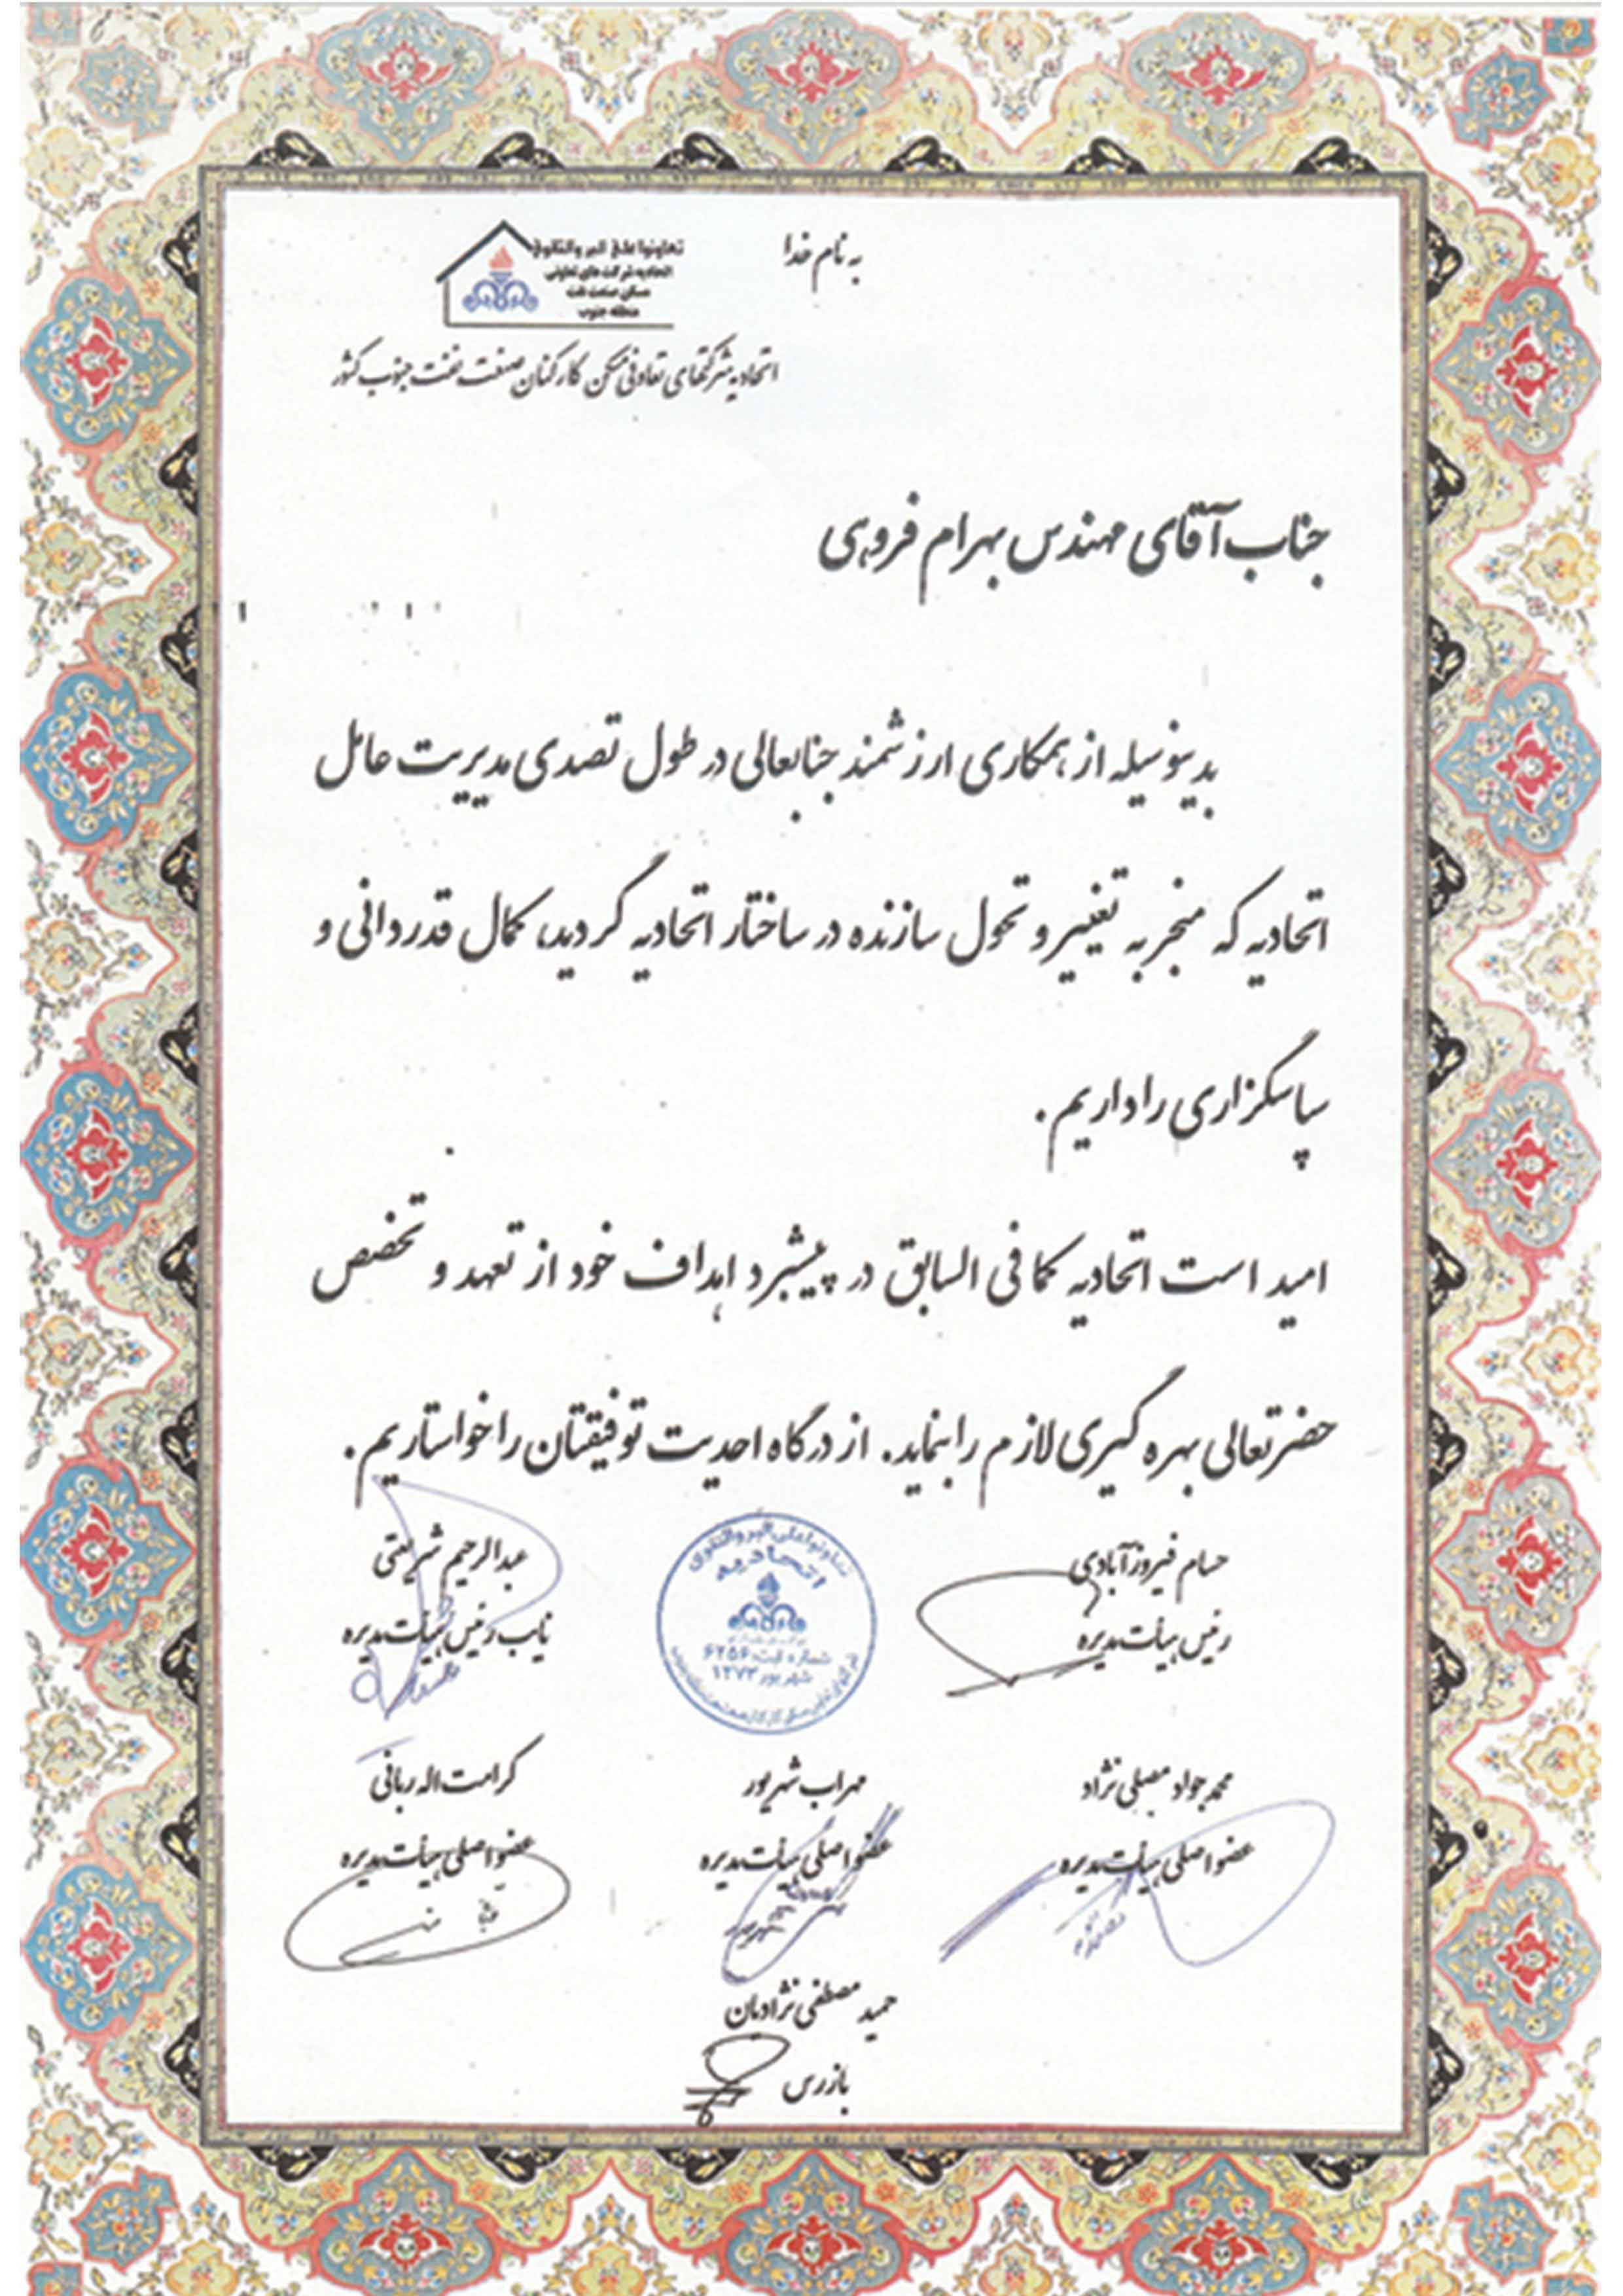 Acknowledgement from managing committee of dwelling cooperation company of employees of sowth oil company of country.